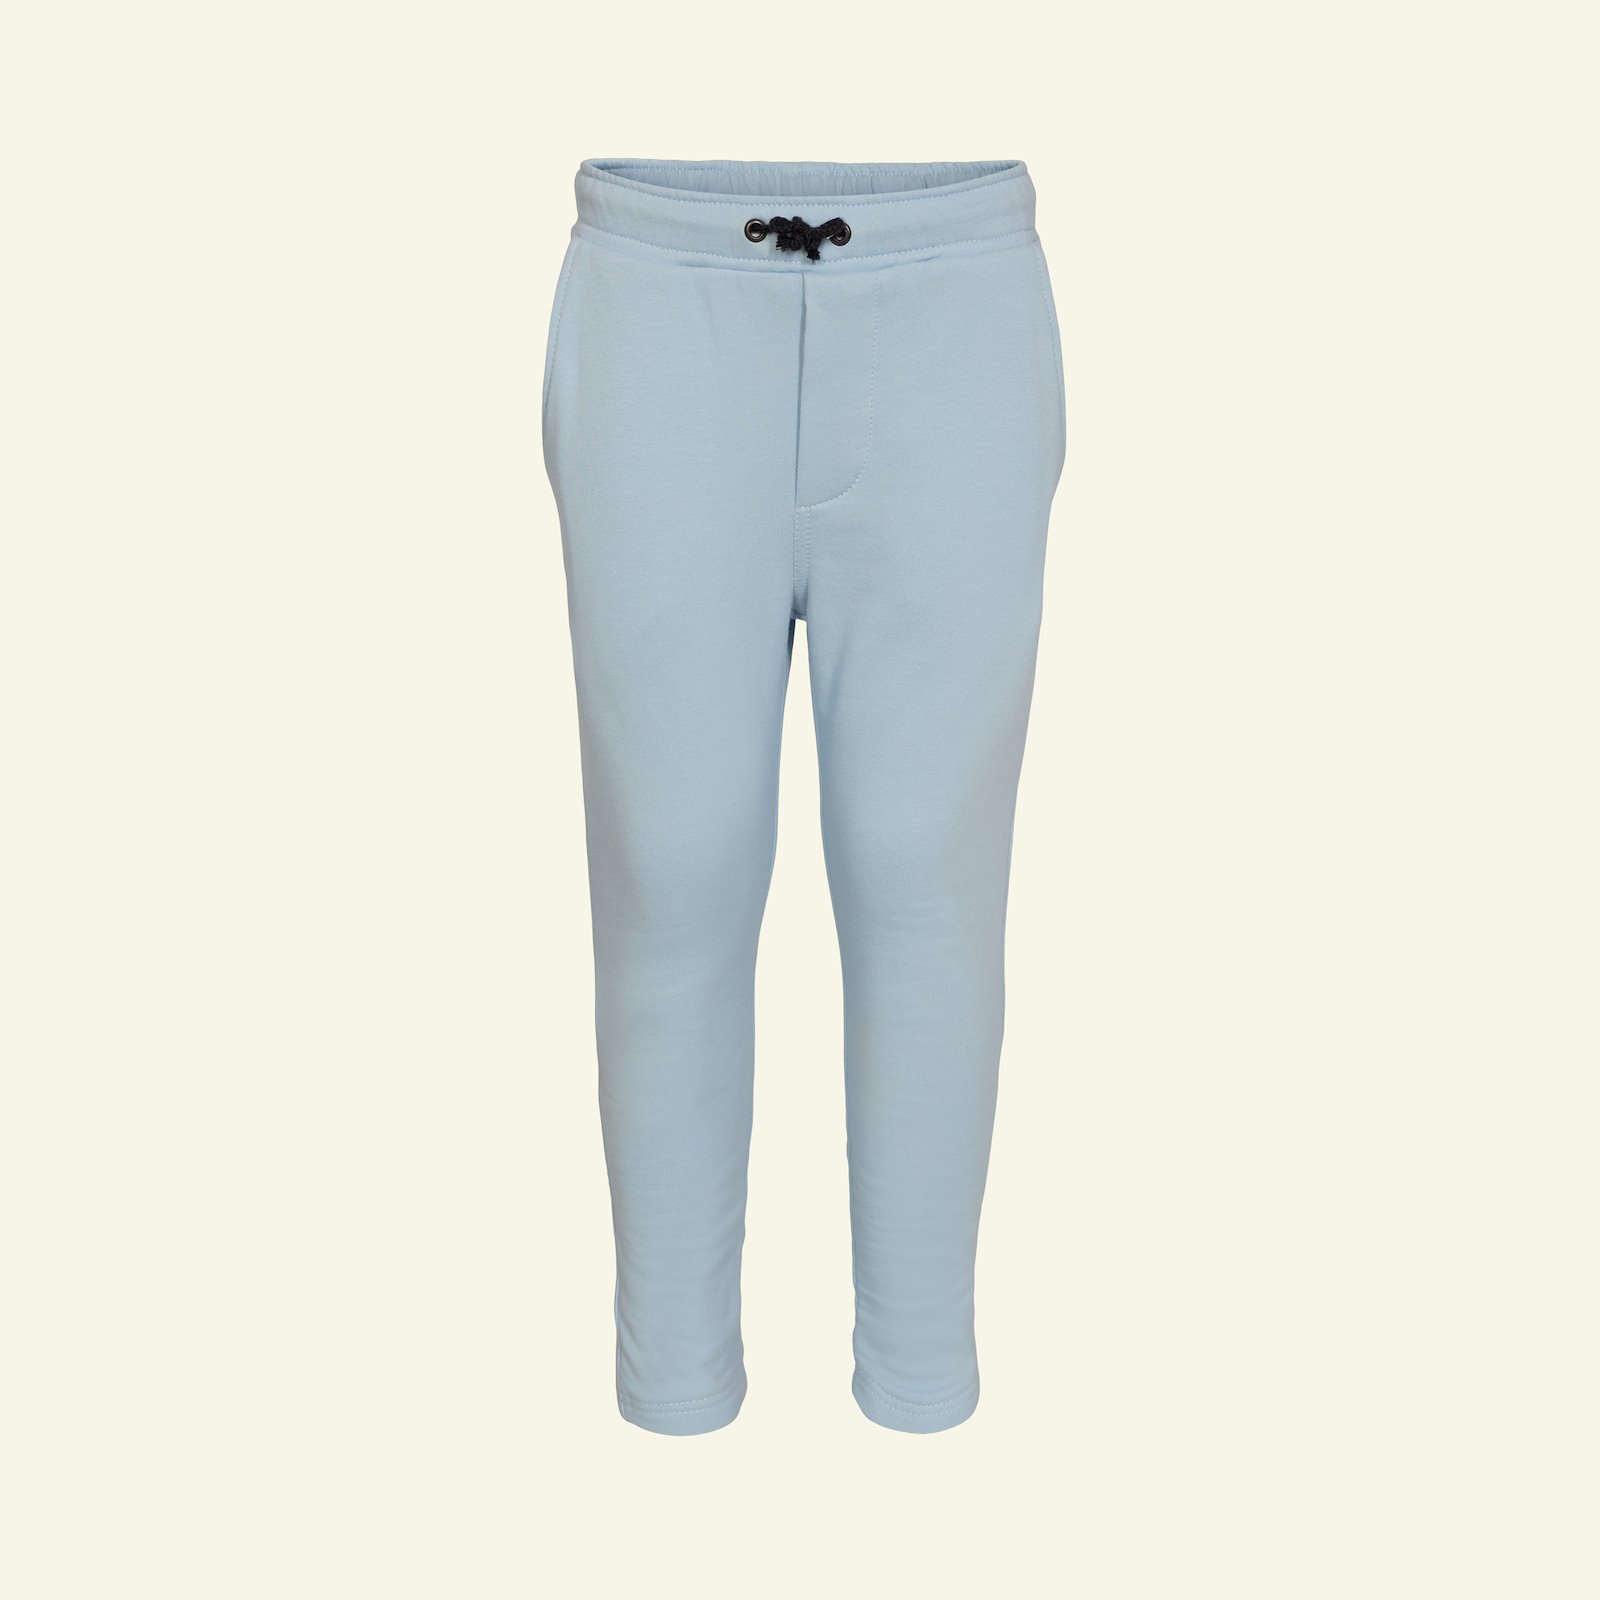 Trousers, 164/14y p60035_211777_sskit